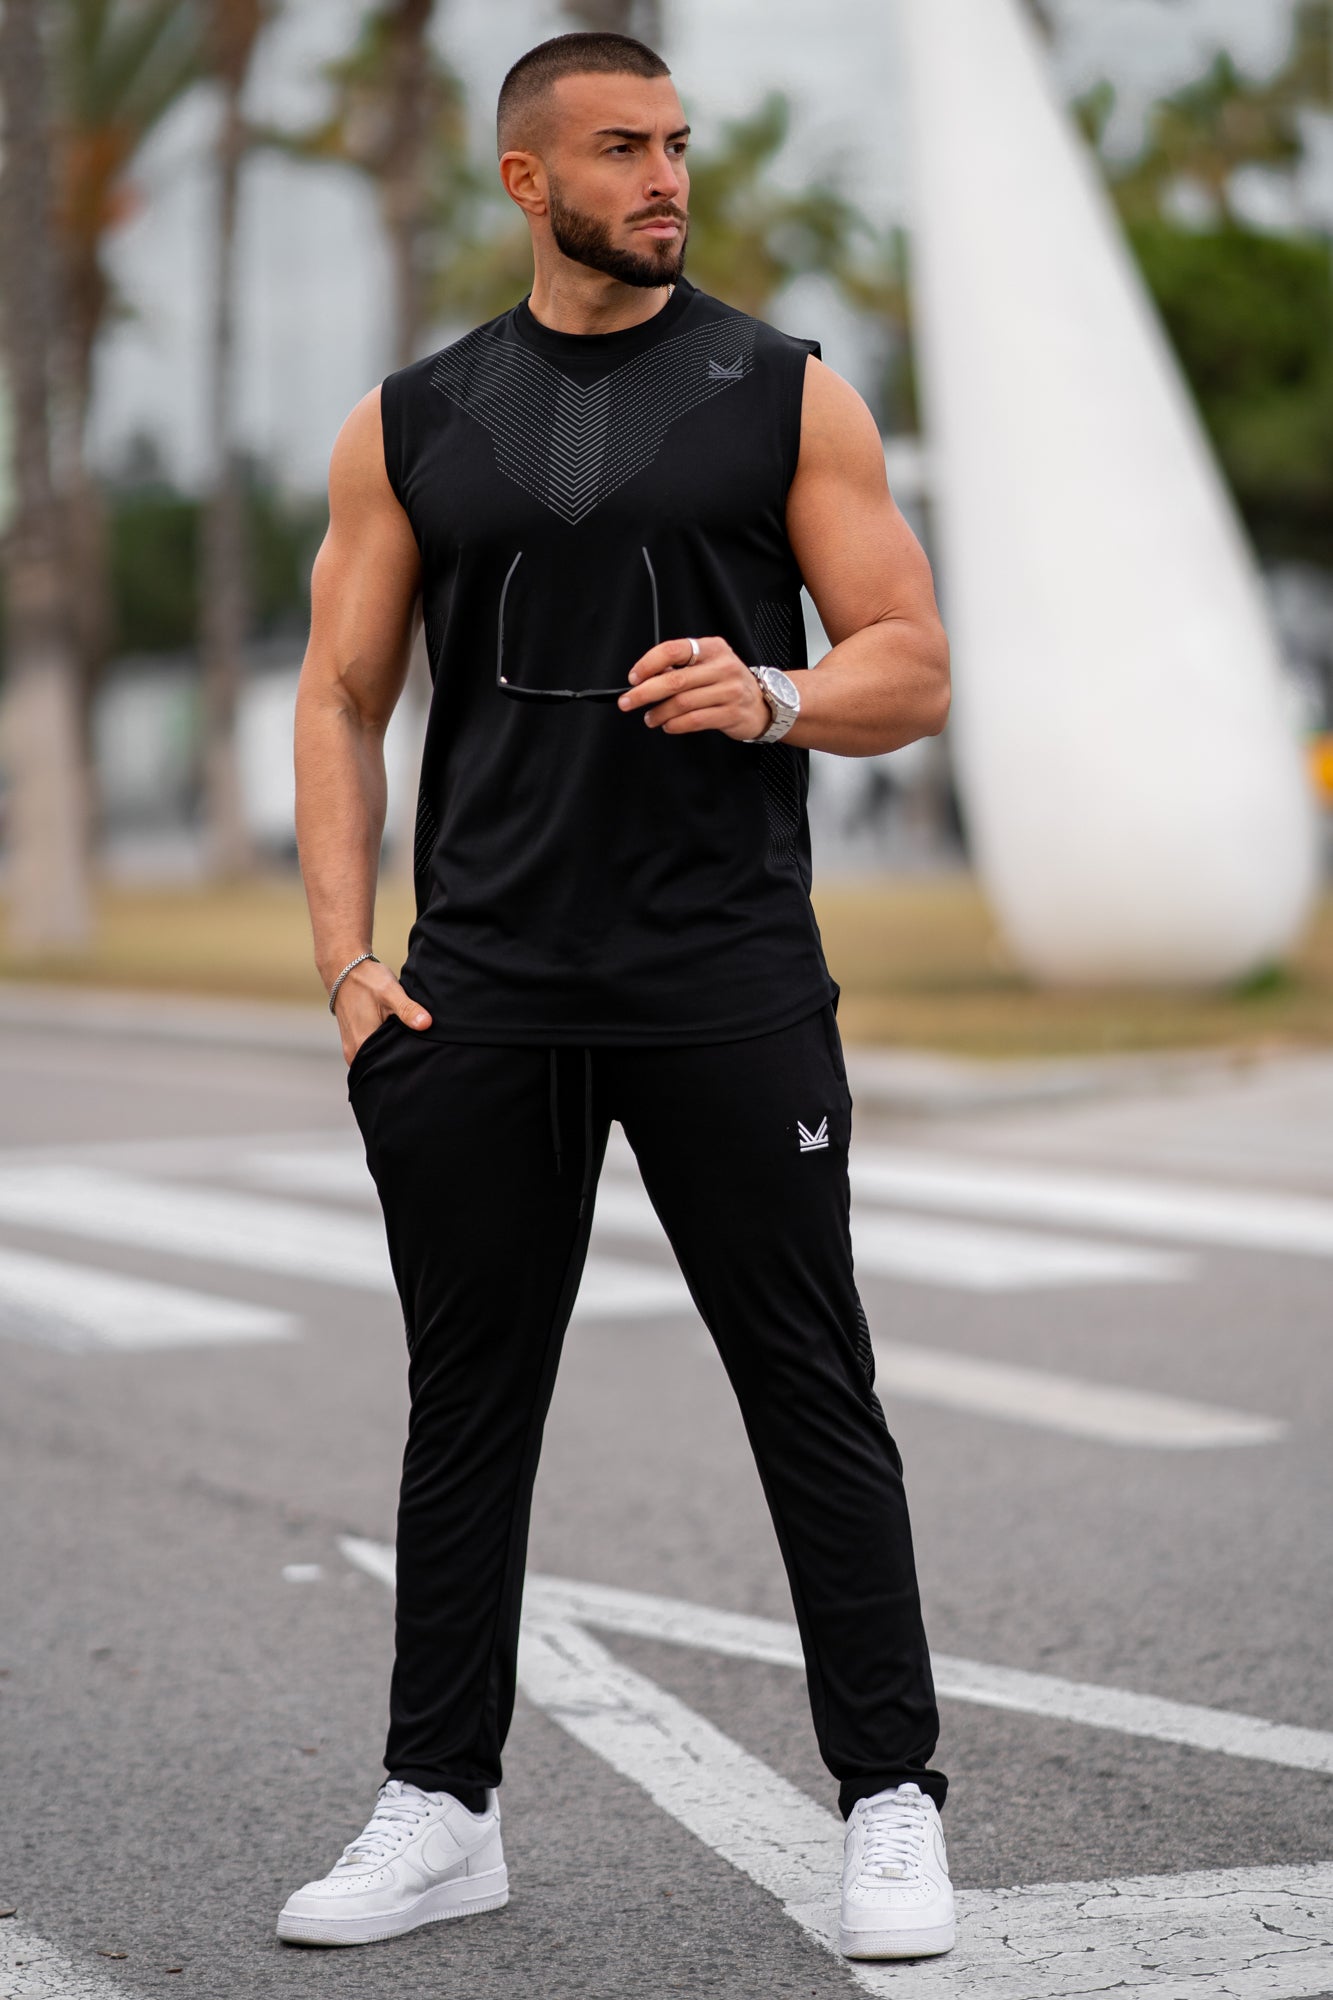 Muscle Sleevless Quickdry Twinset - Black